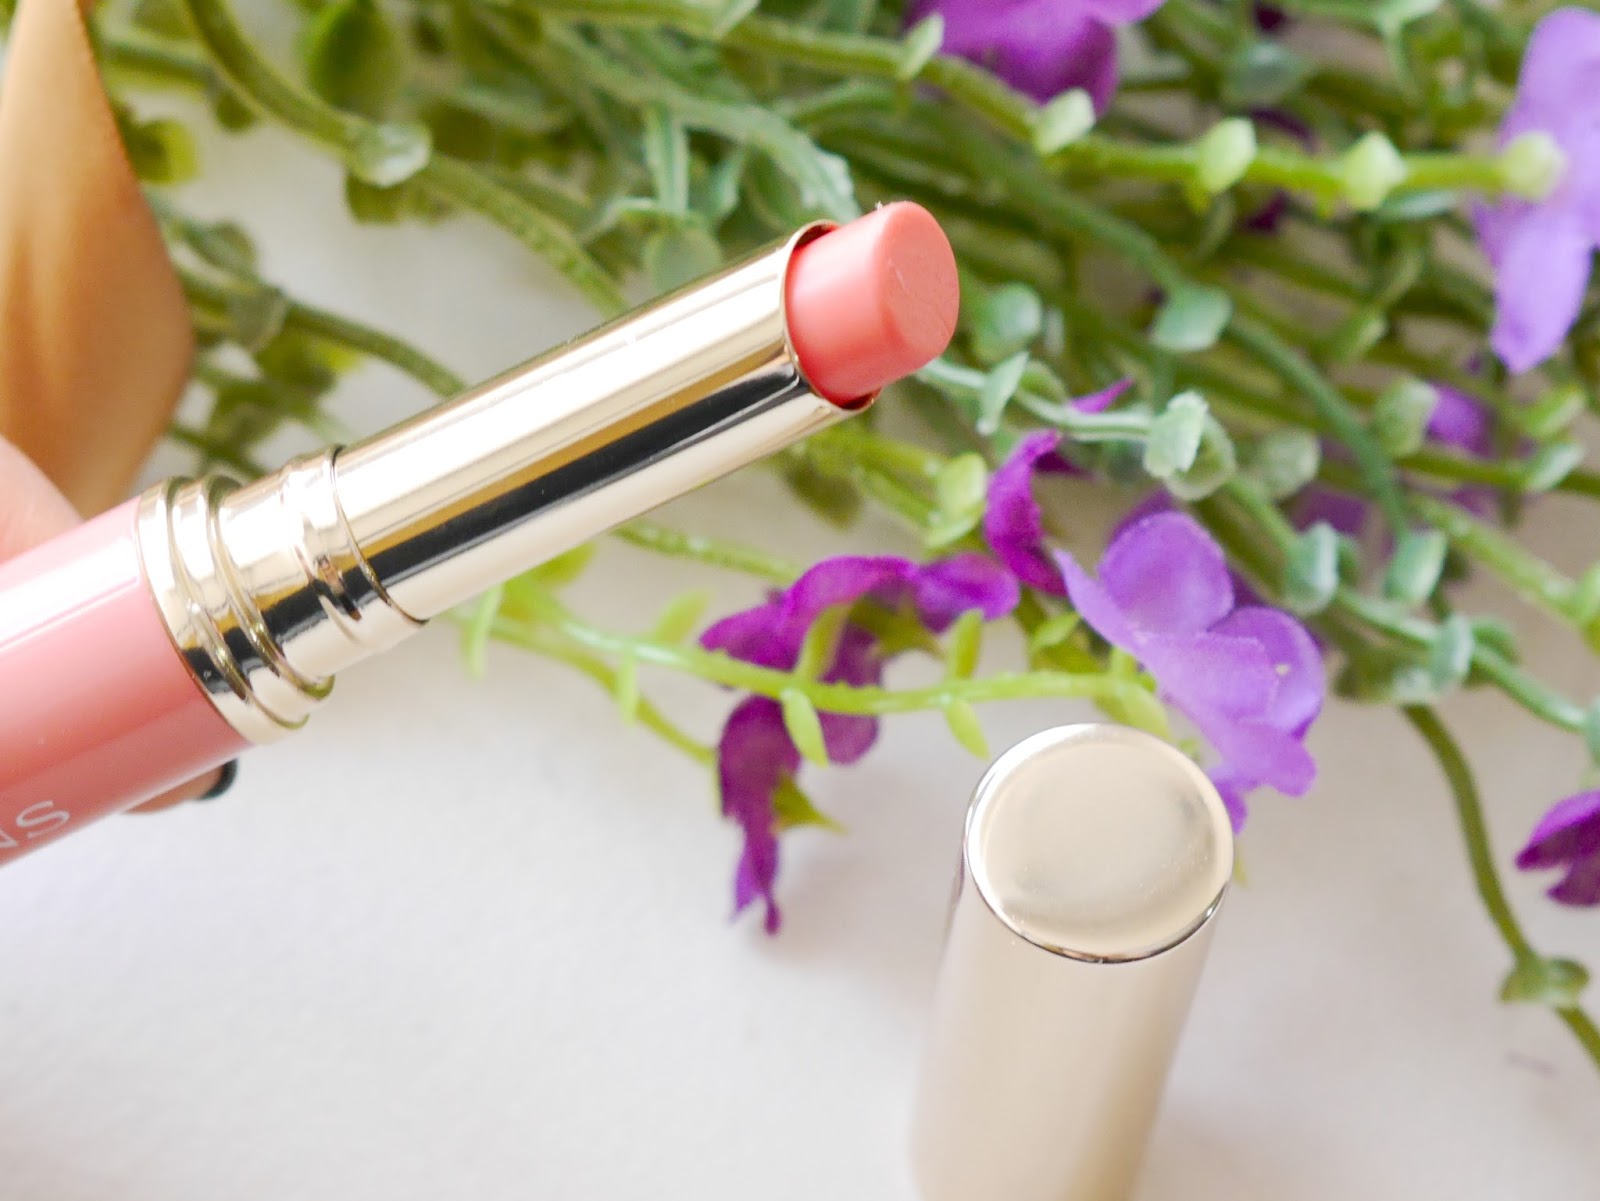 Clarins Lip Comfort Oil honey and Instant Light Lip Balm Protector rose review